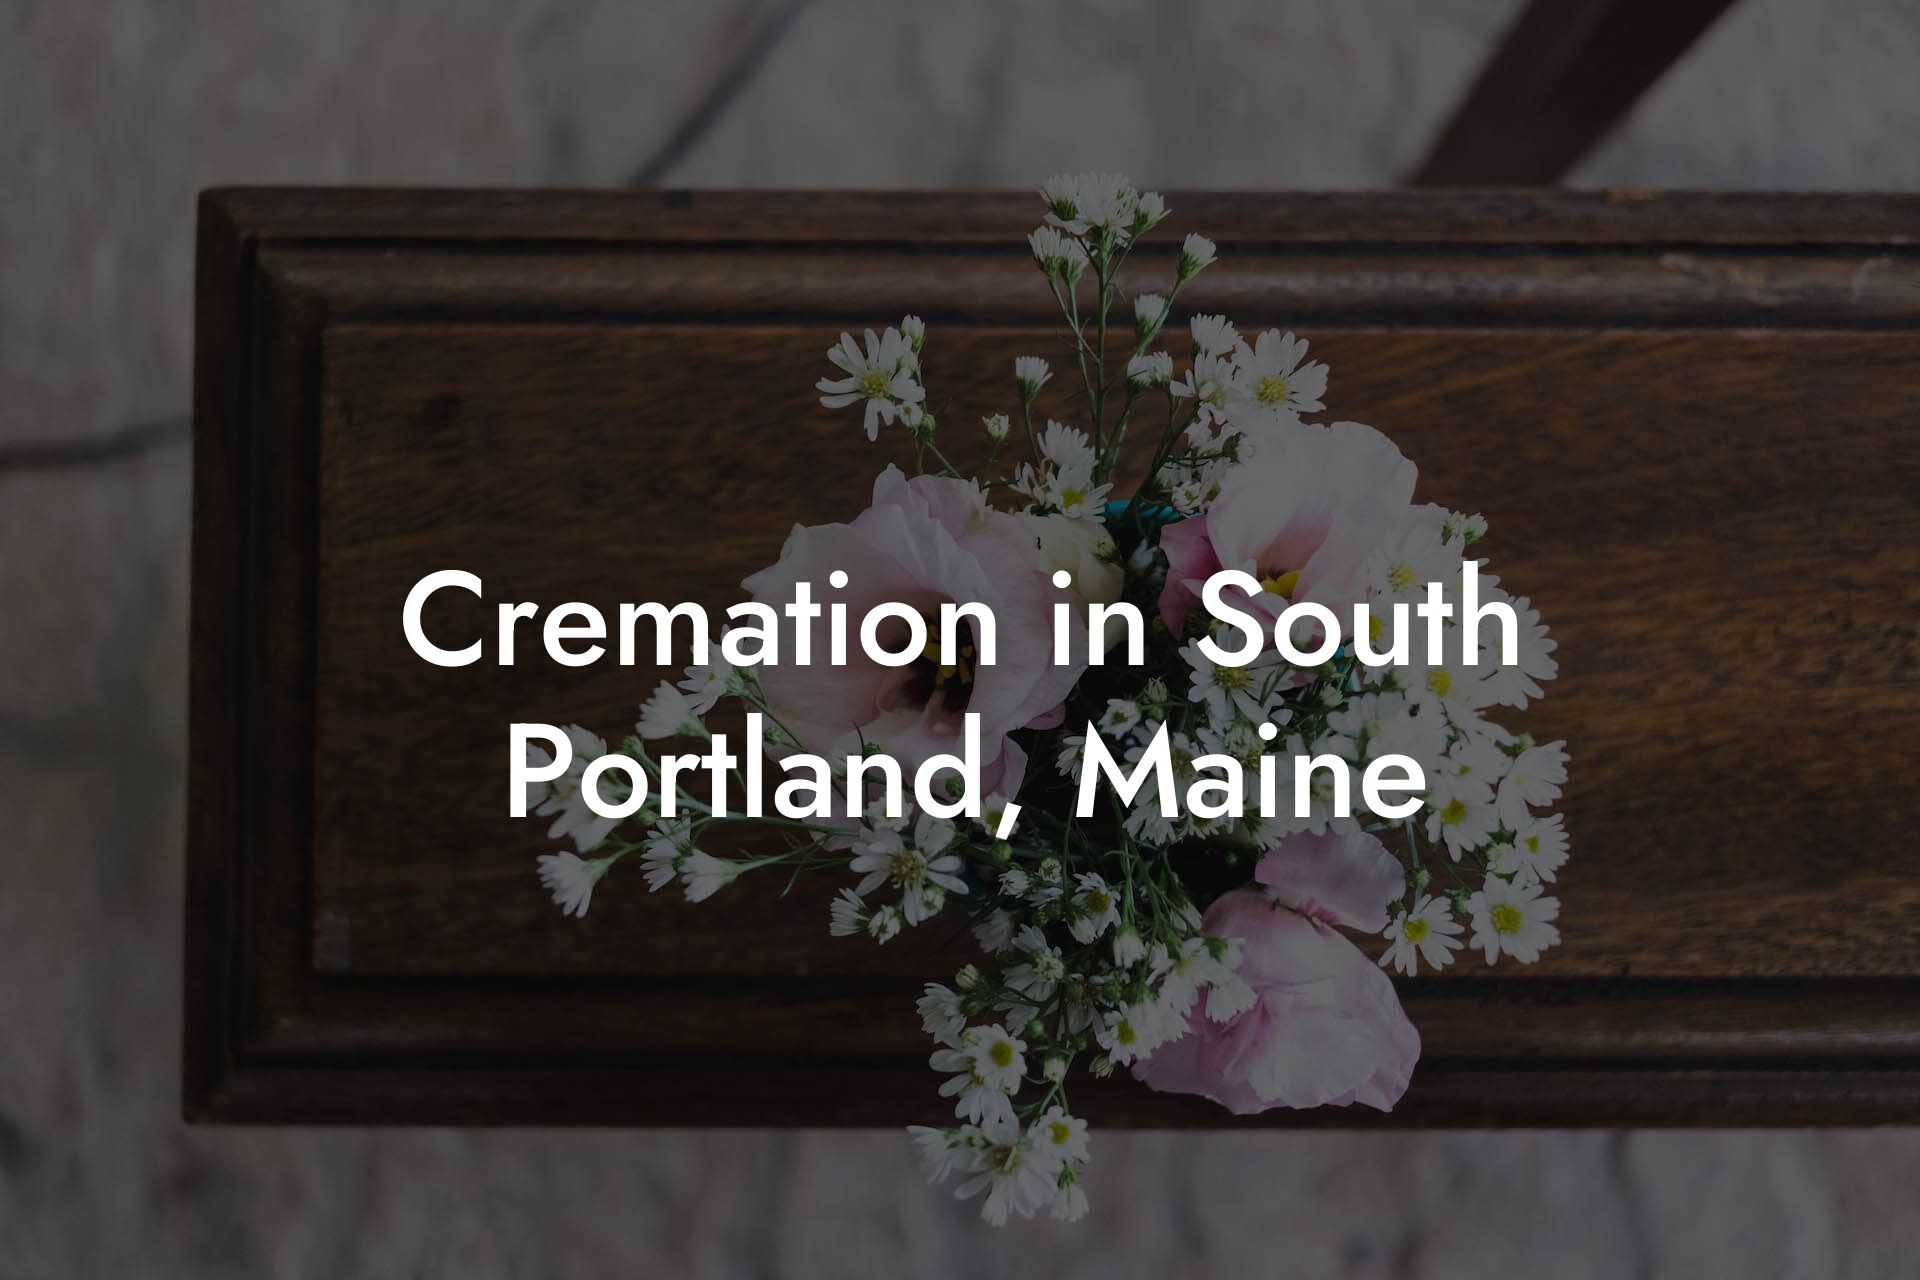 Cremation in South Portland, Maine